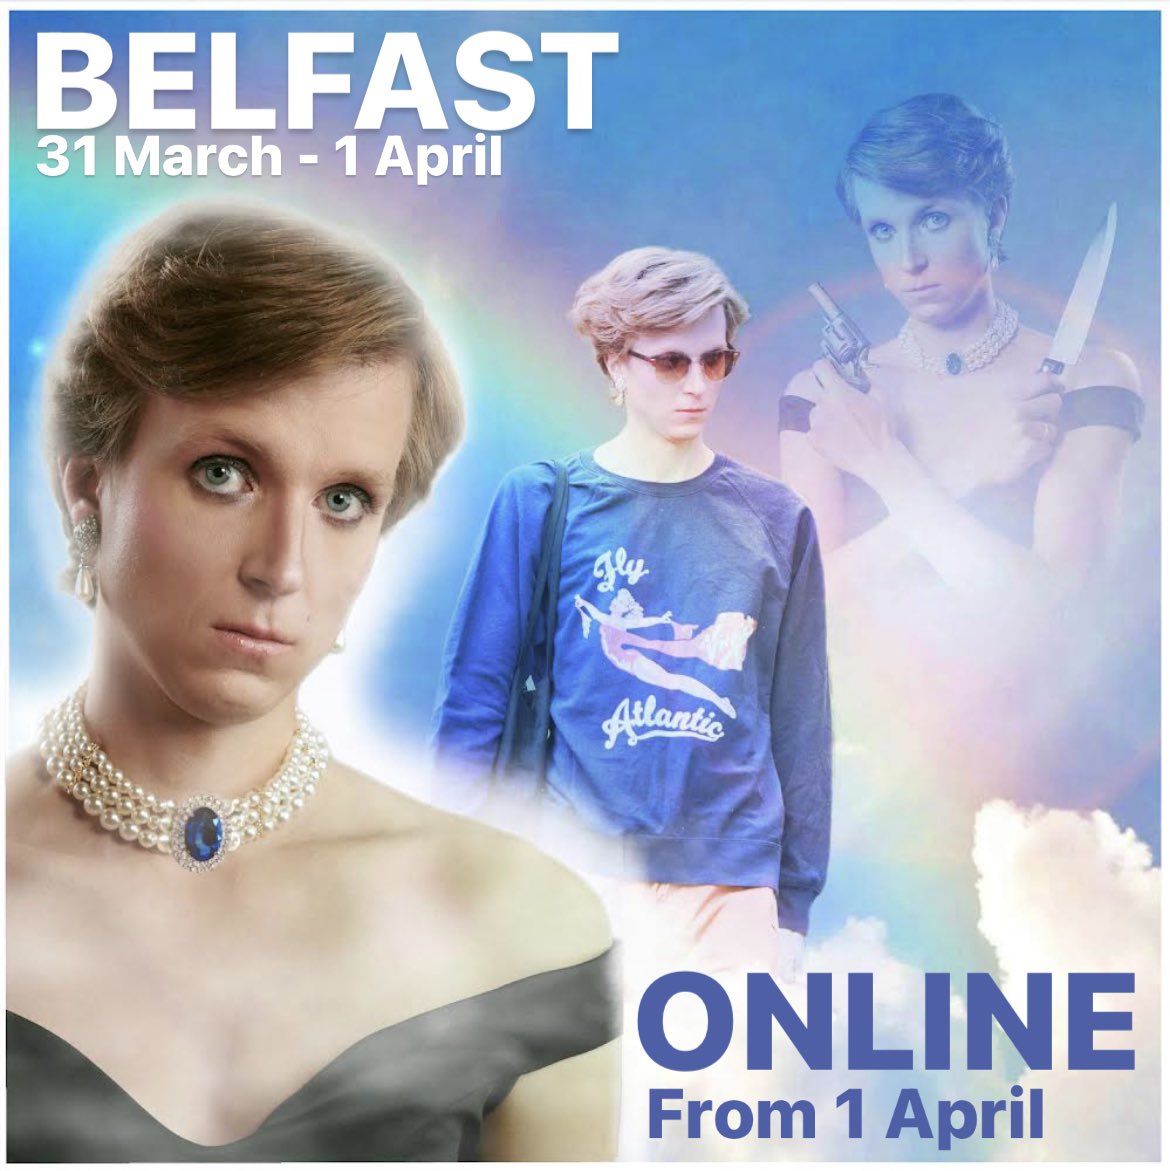 👸🏼BELFAST and ONLINE👸🏼 Tickets for 'Diana: The Untold and Untrue Story' are now on sale! Diana can't wait to visit @AccidentalT - from where the show will also be streamed so that you can catch it from anywhere in the world. 🌍 Grab your tickets at linktr.ee/untruediana